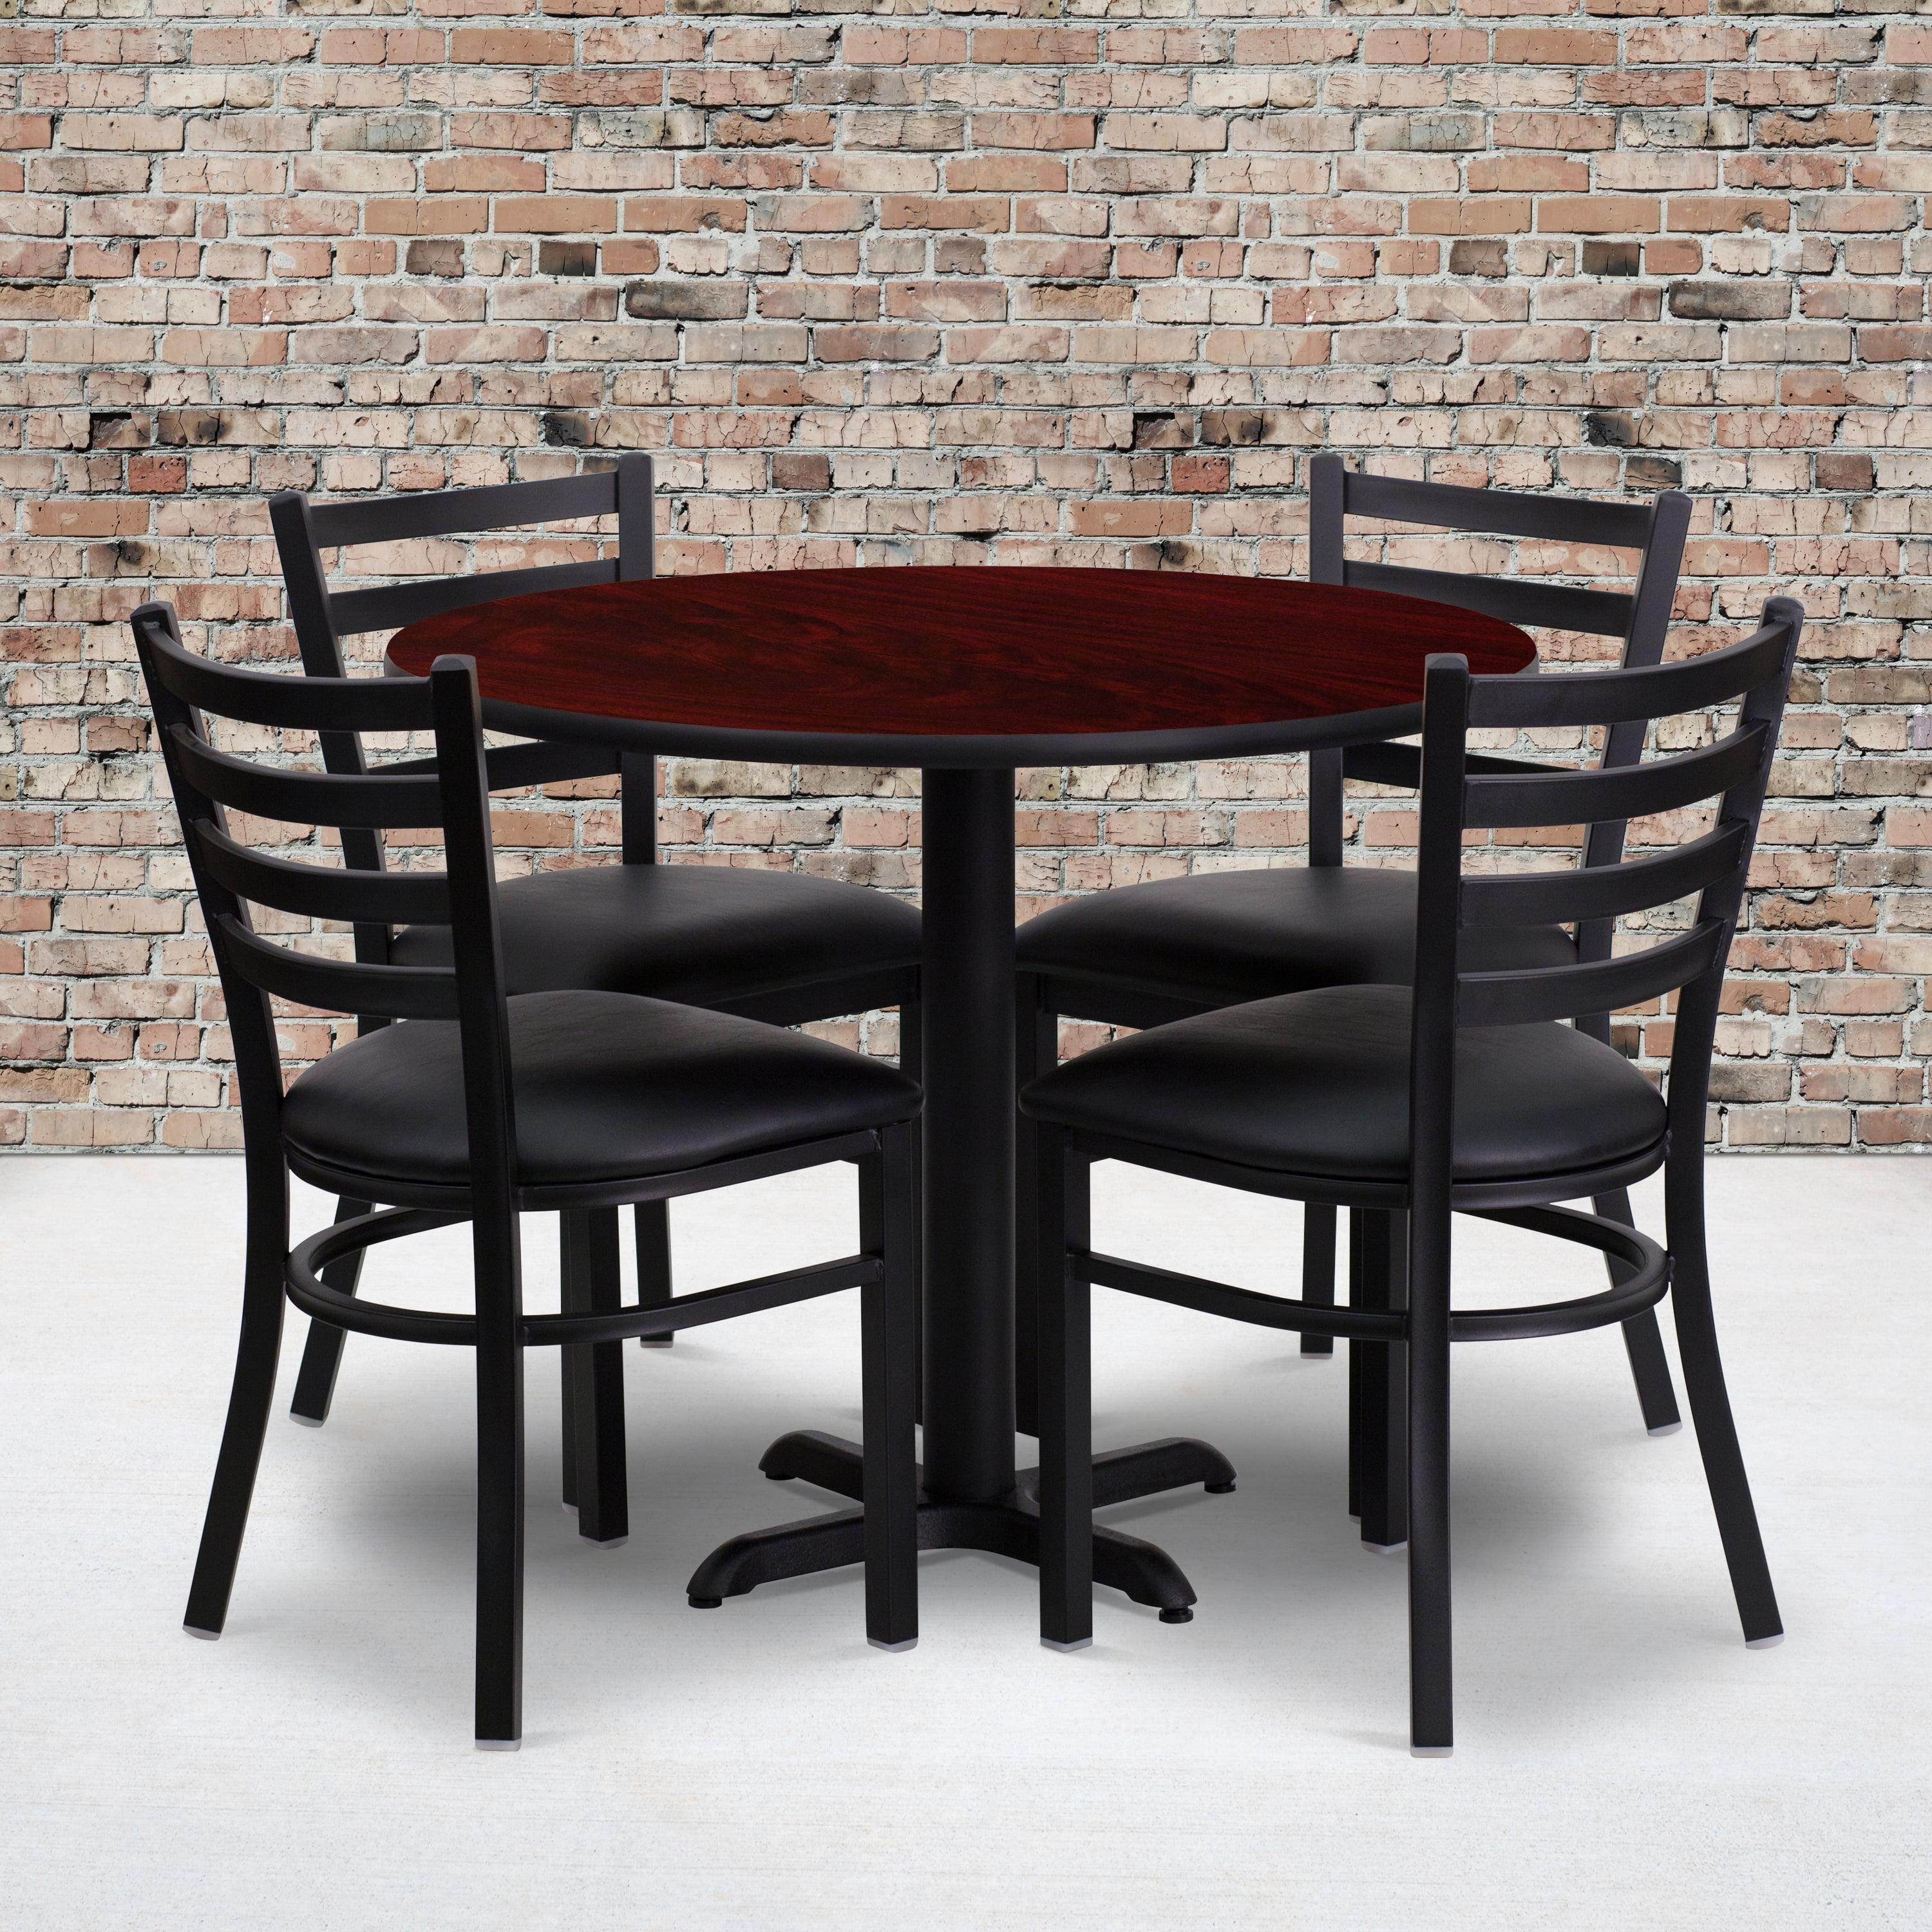 Elegant 36'' Mahogany Laminate Round Dining Set with 4 Red Ladder Chairs